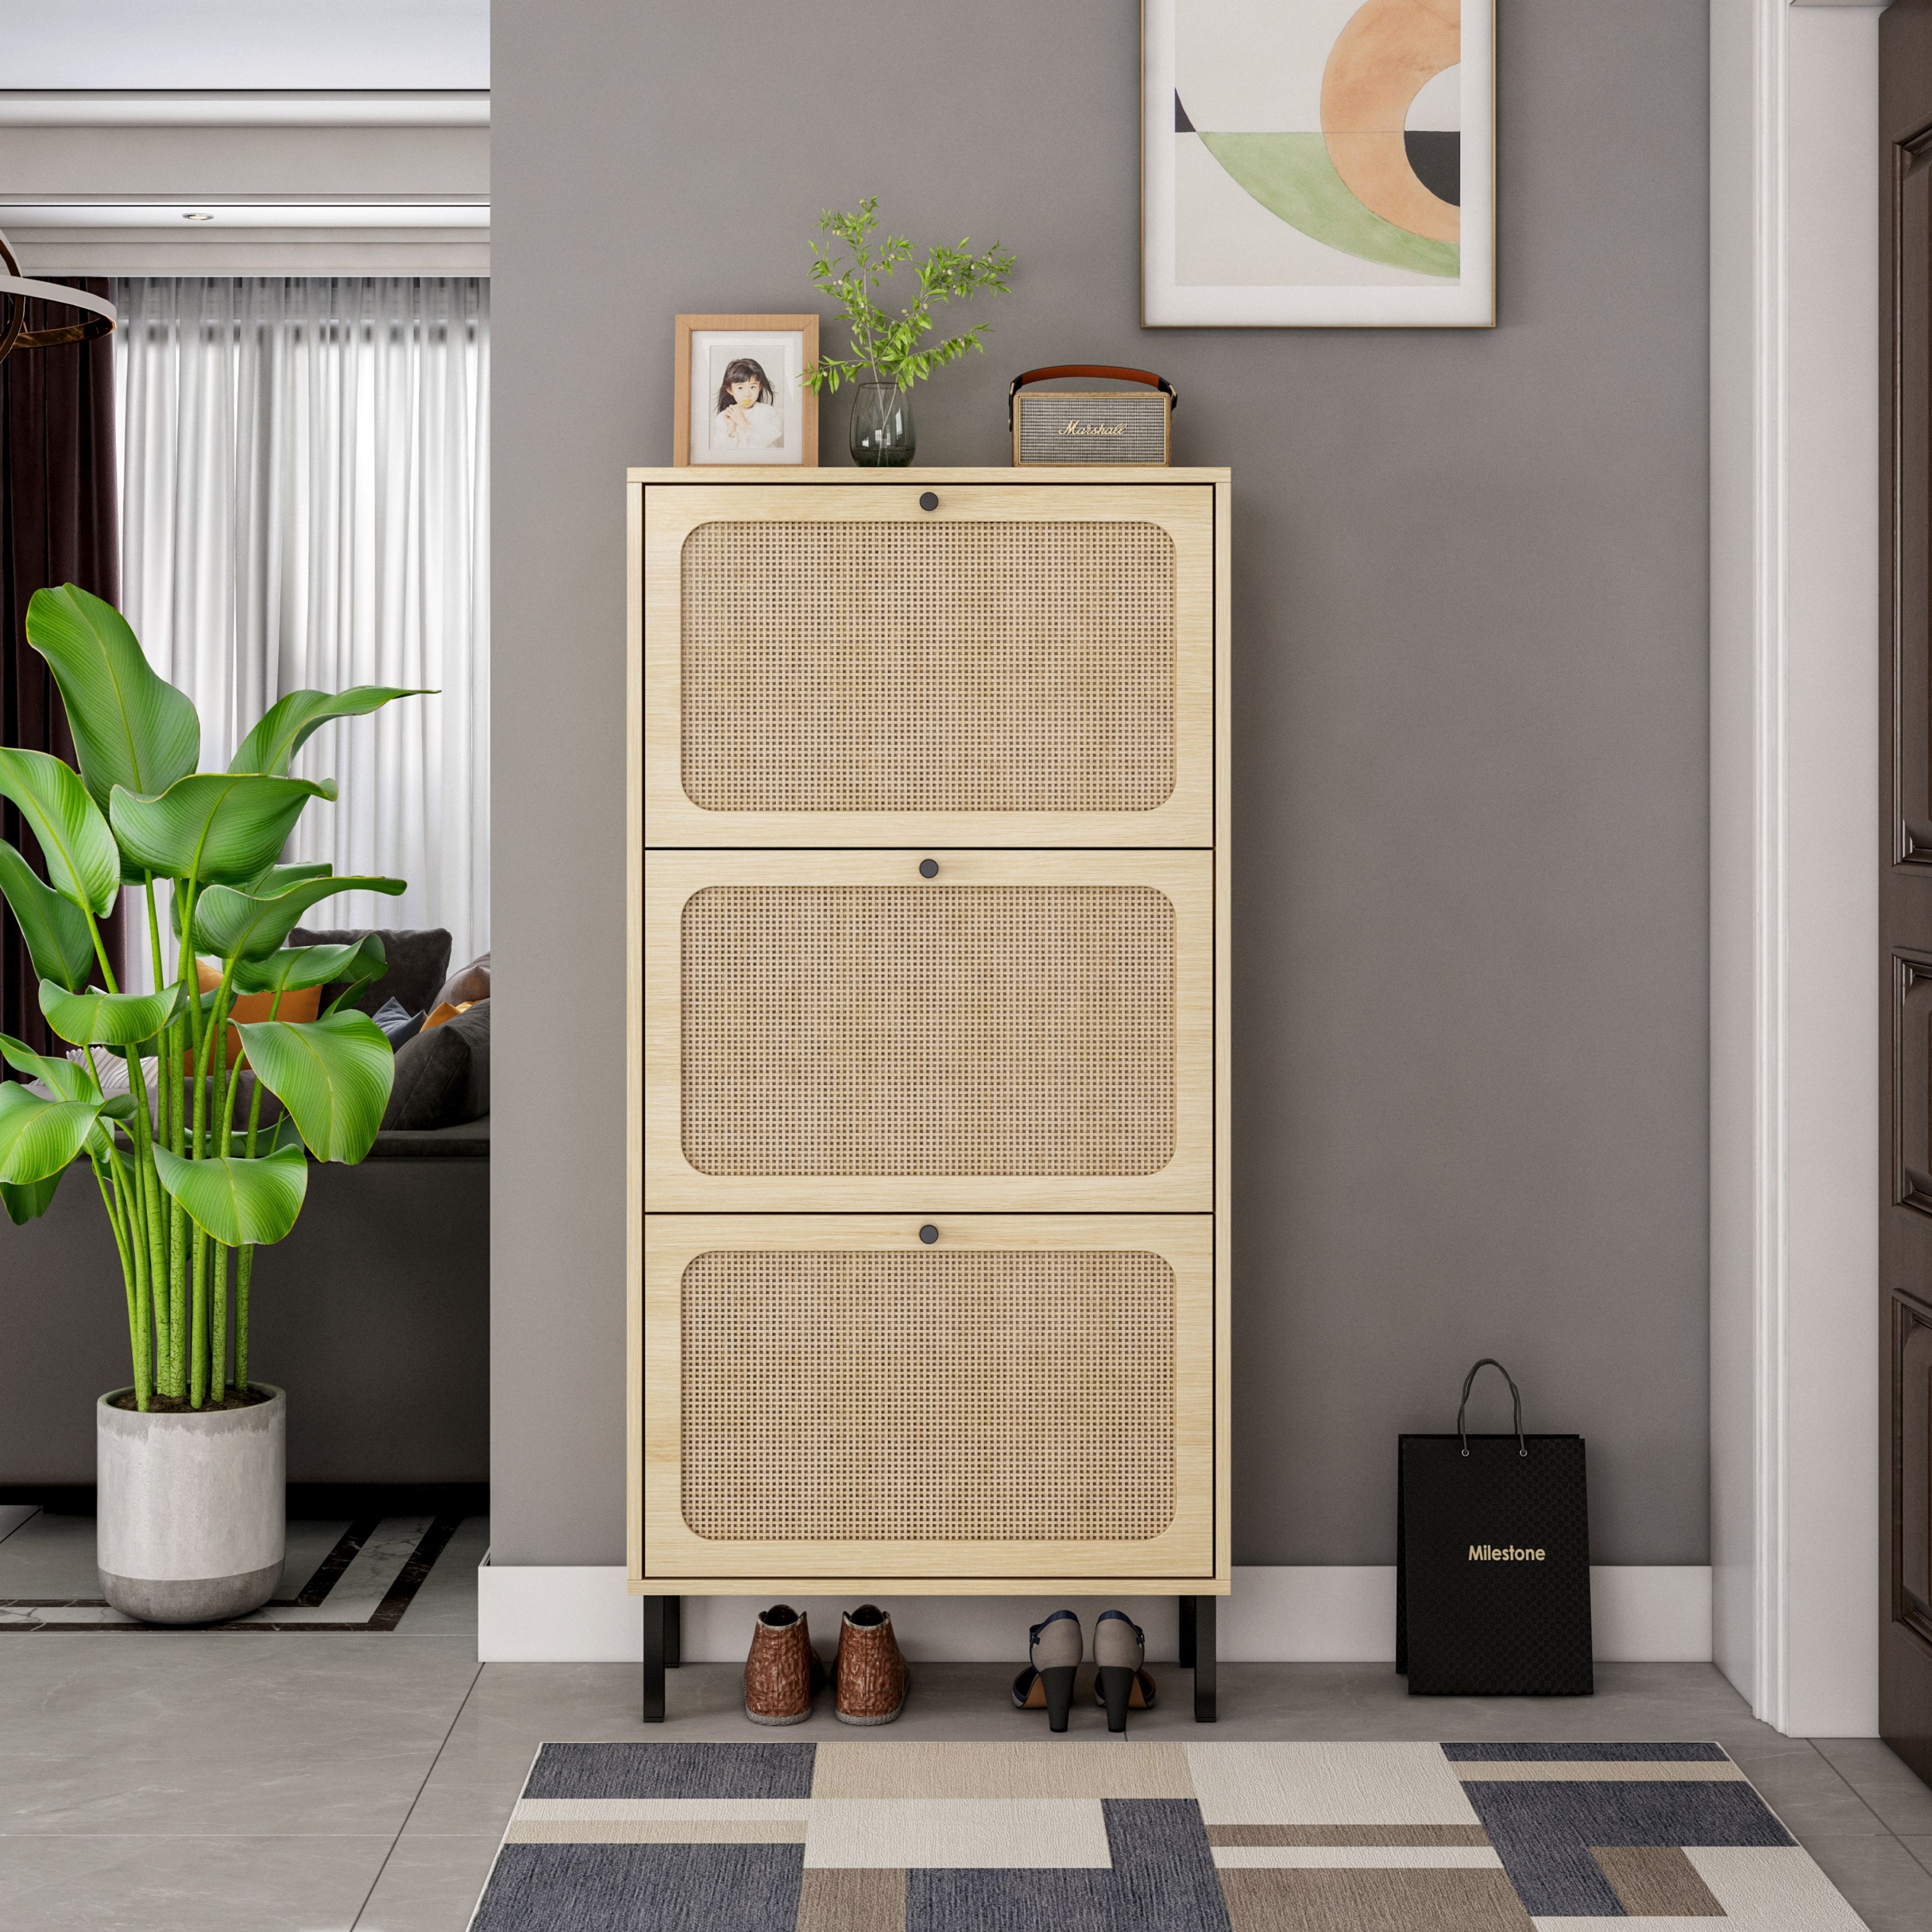 https://ak1.ostkcdn.com/images/products/is/images/direct/dd5e245b1dce15614ff6adc4d84fed373cf58d29/Freestanding-3-Flip-Drawers-Shoe-Rack-and-3-Door-Slim-Entryway-Shoe-Organizer-with-Half-Round-Woven-Rattan-Doors.jpg